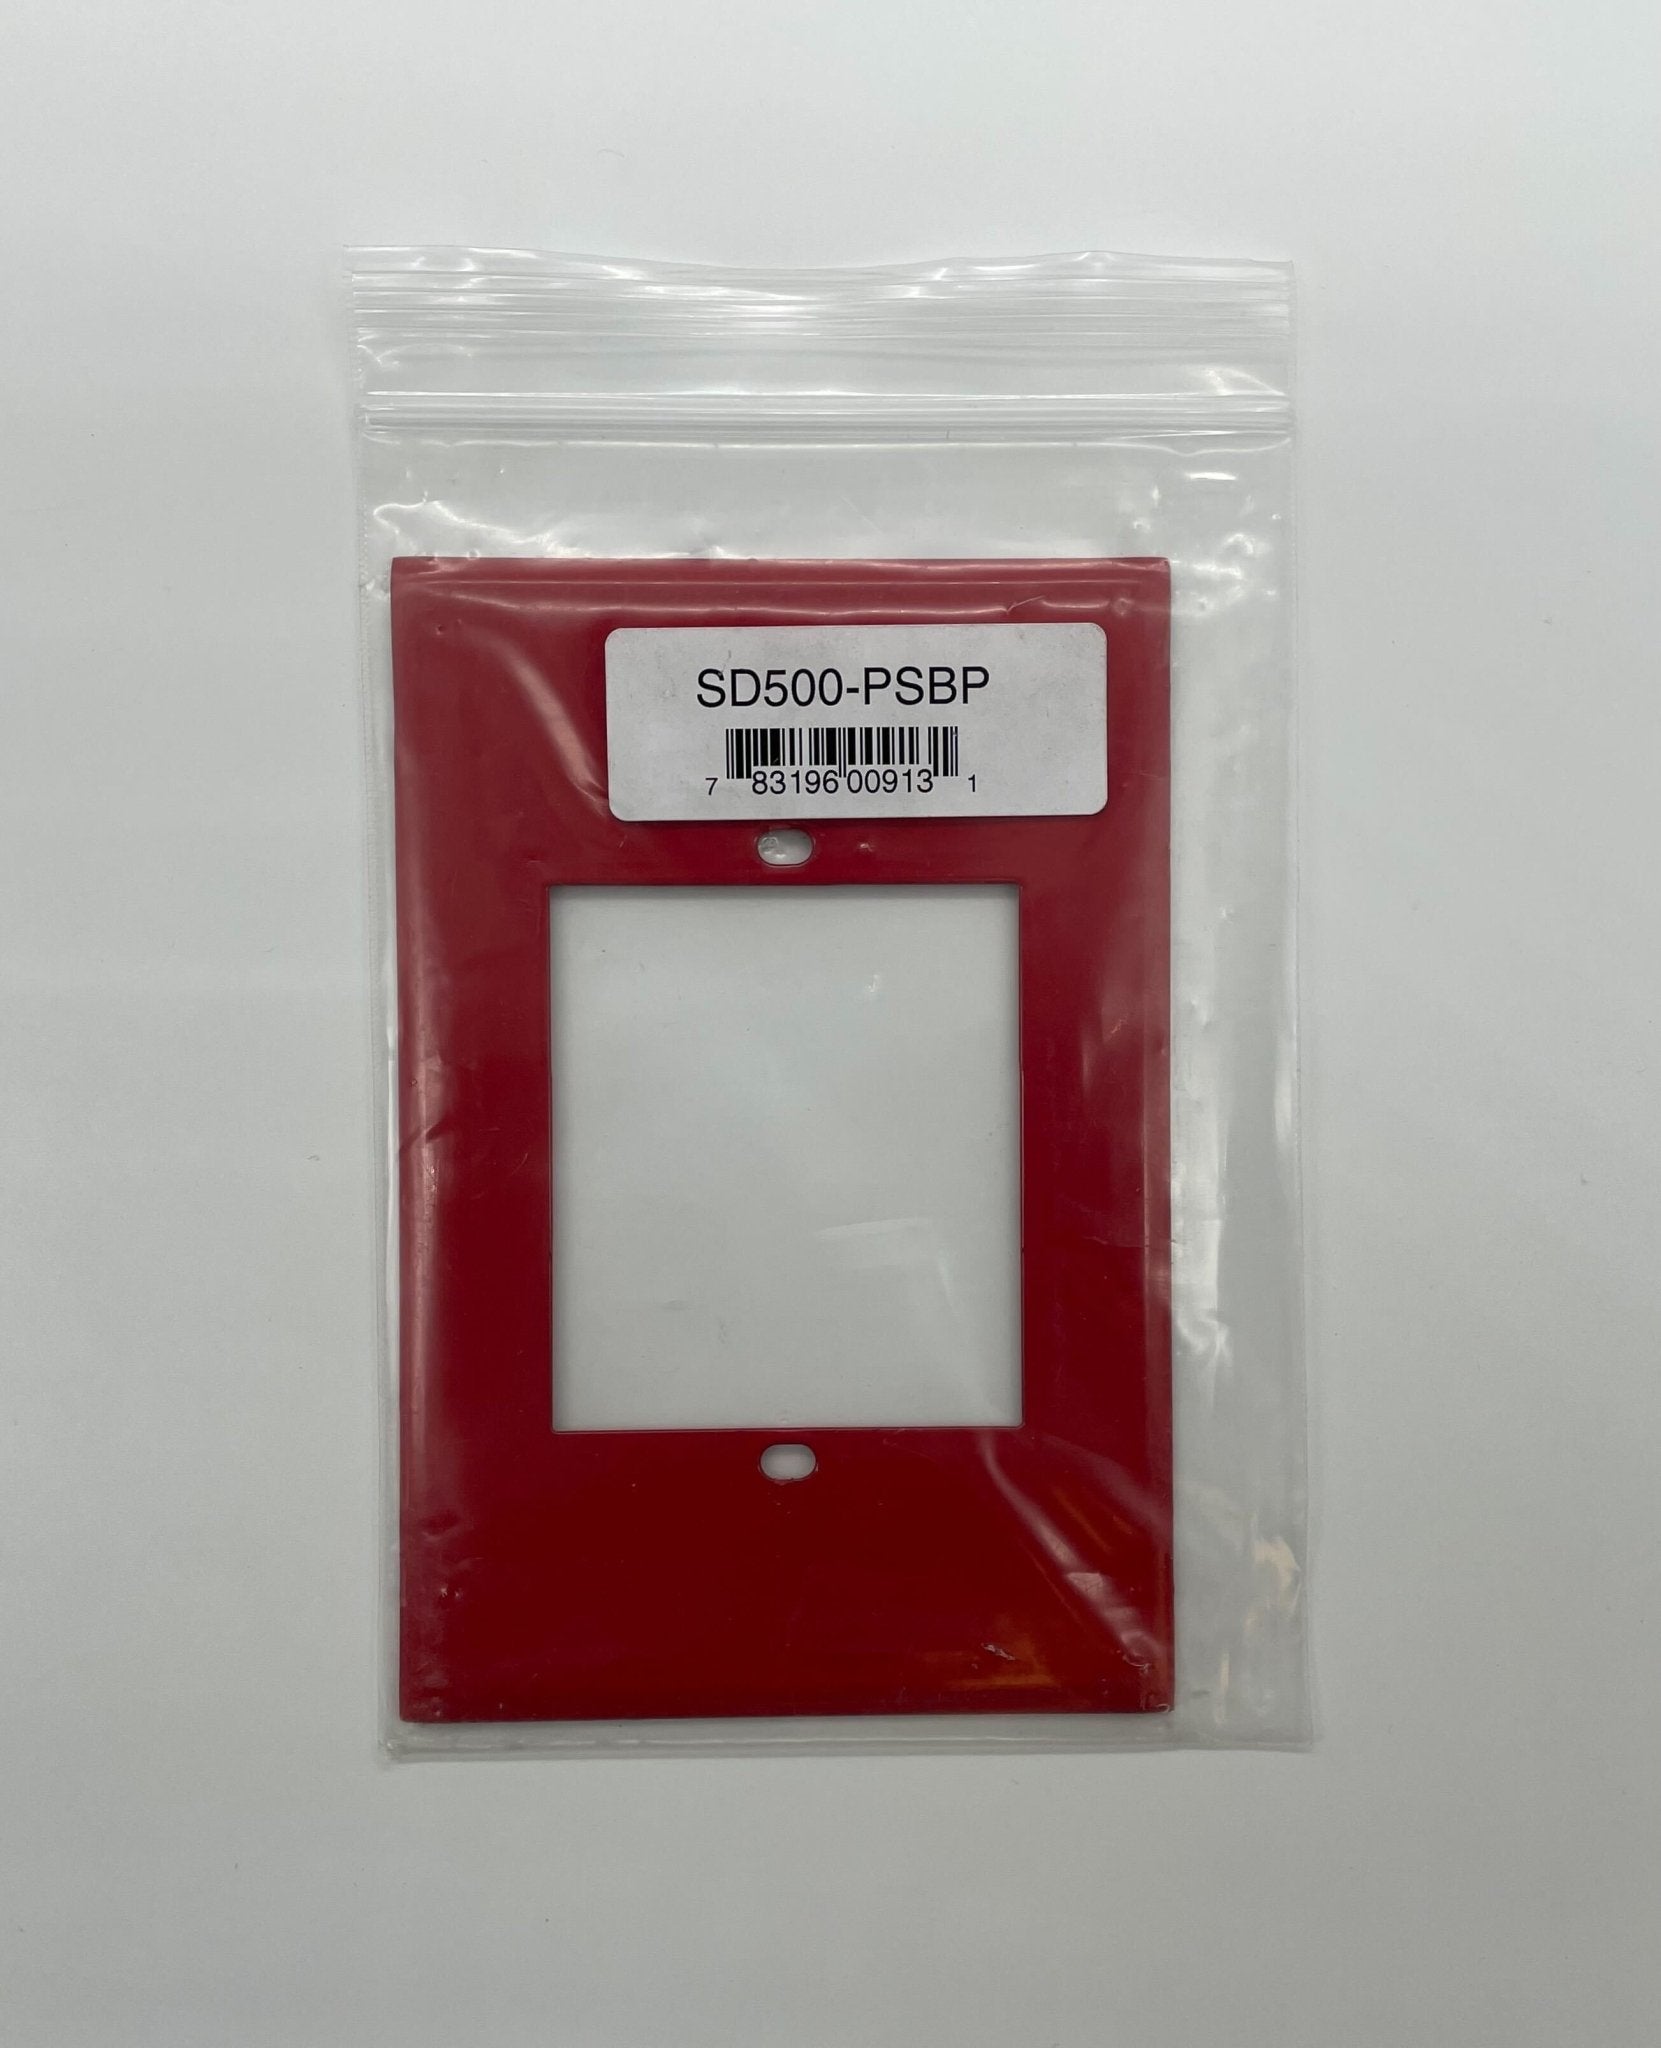 Silent Knight SD500-PSBP Station Backplate - The Fire Alarm Supplier